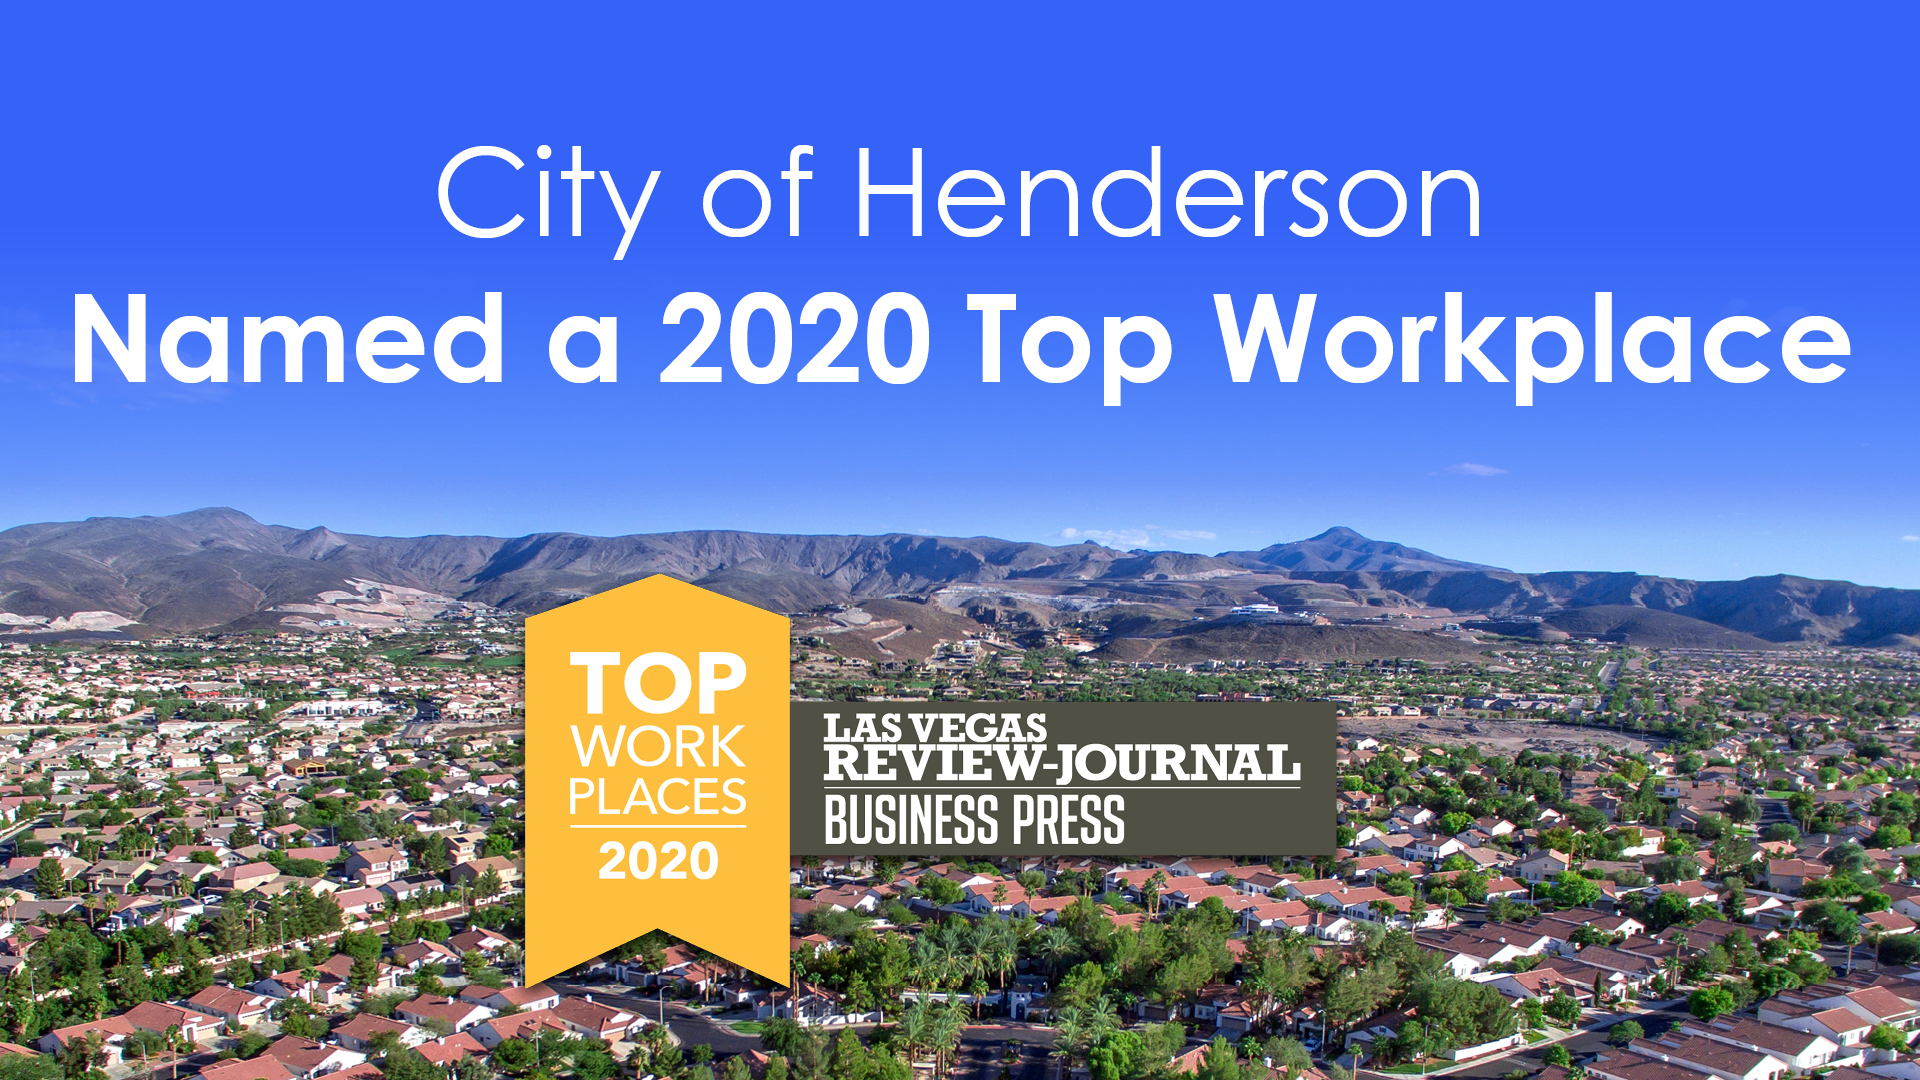 City of Henderson named a 2020 Top Workplace